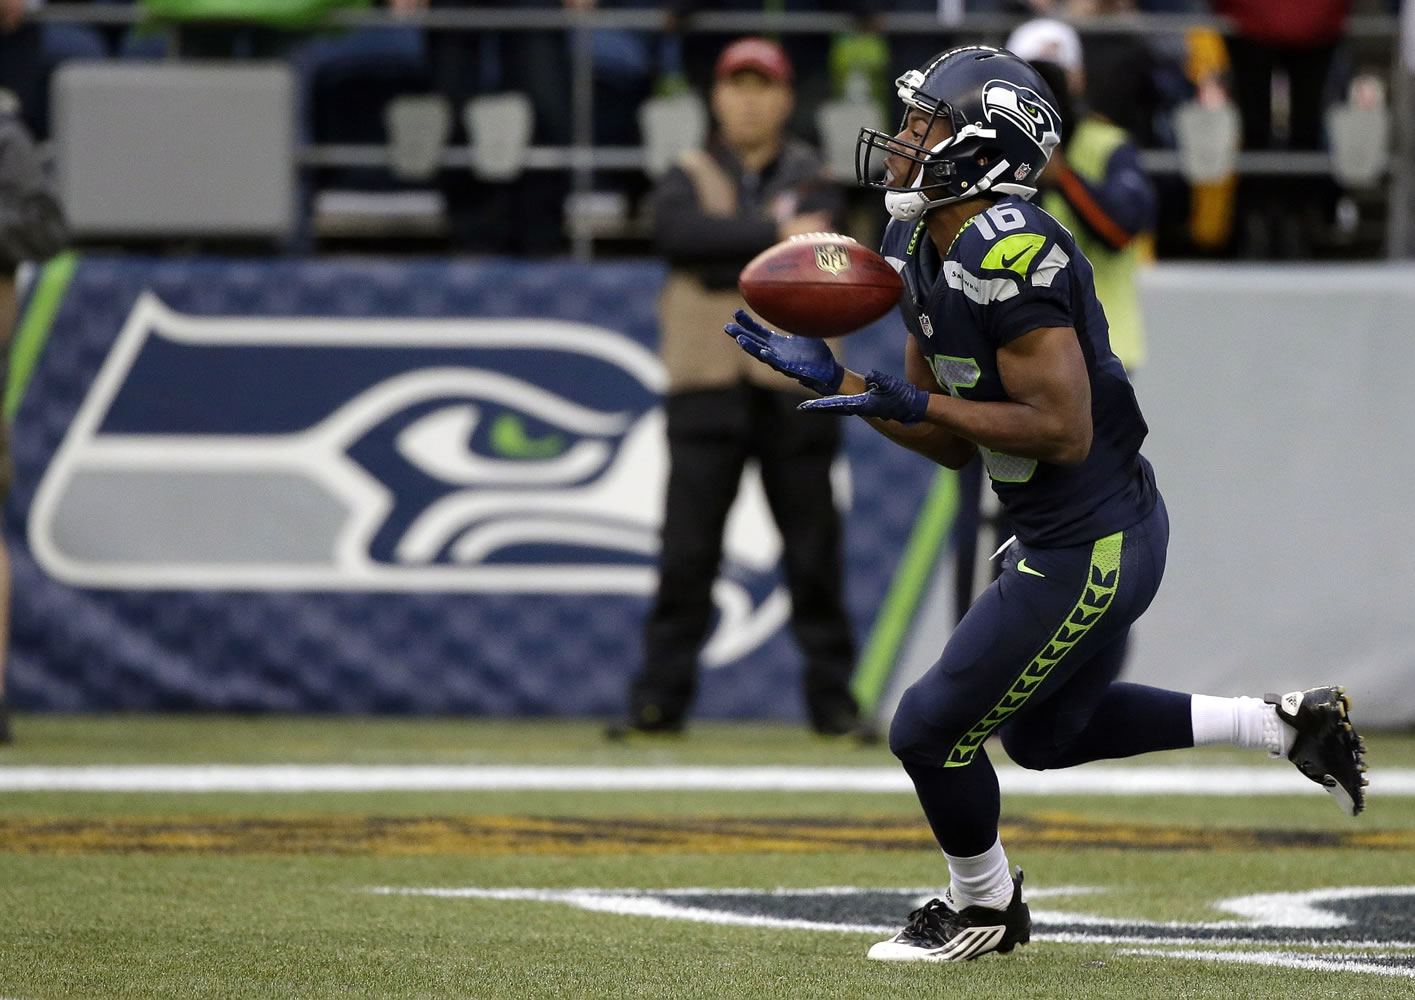 FILE - In this Aug. 14, 2015, file photo, Seattle Seahawks wide receiver Tyler Lockett begins his 103-yard kickoff return for a touchdown against the Denver Broncos in the first half of a preseason NFL football game in Seattle. All the concerns that emerged from Seattle's preseason opener were muted thanks to the standout performances from the Seahawks top two draft picks, defensive end Frank Clark and wide receiver Tyler Lockett.